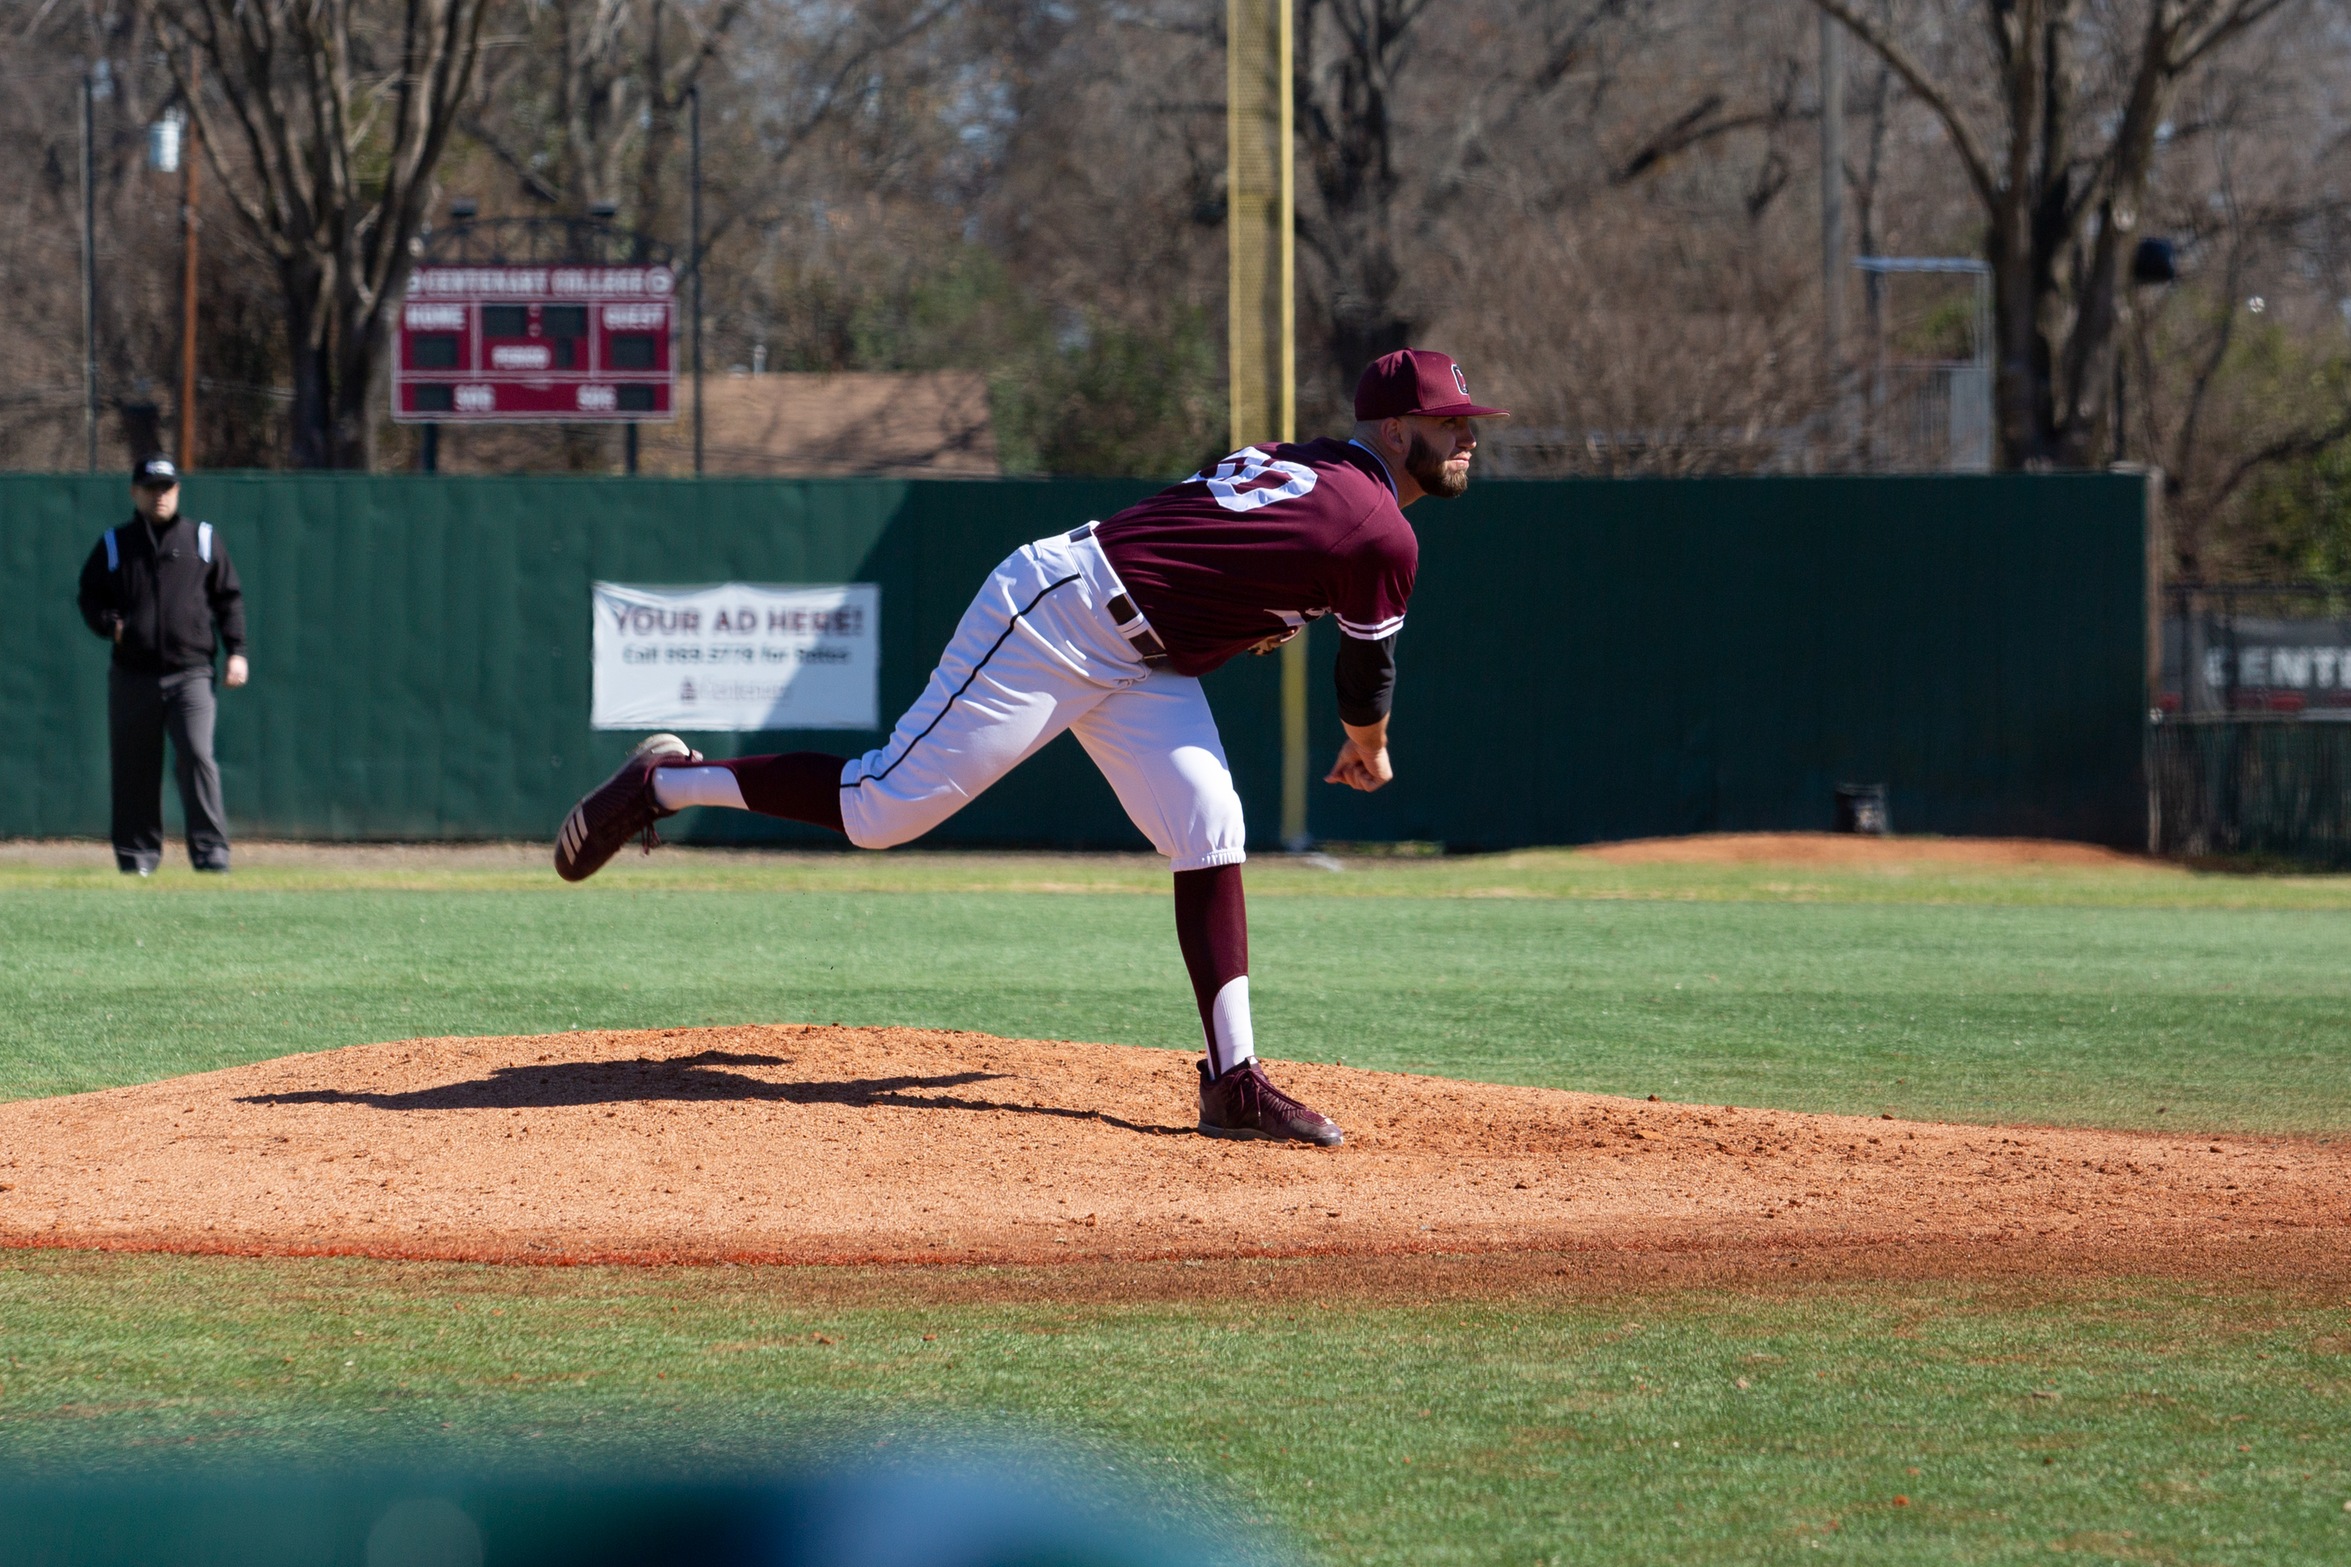 The Diamond Gents were swept in a doubleheader on Saturday by #16 Trinity.